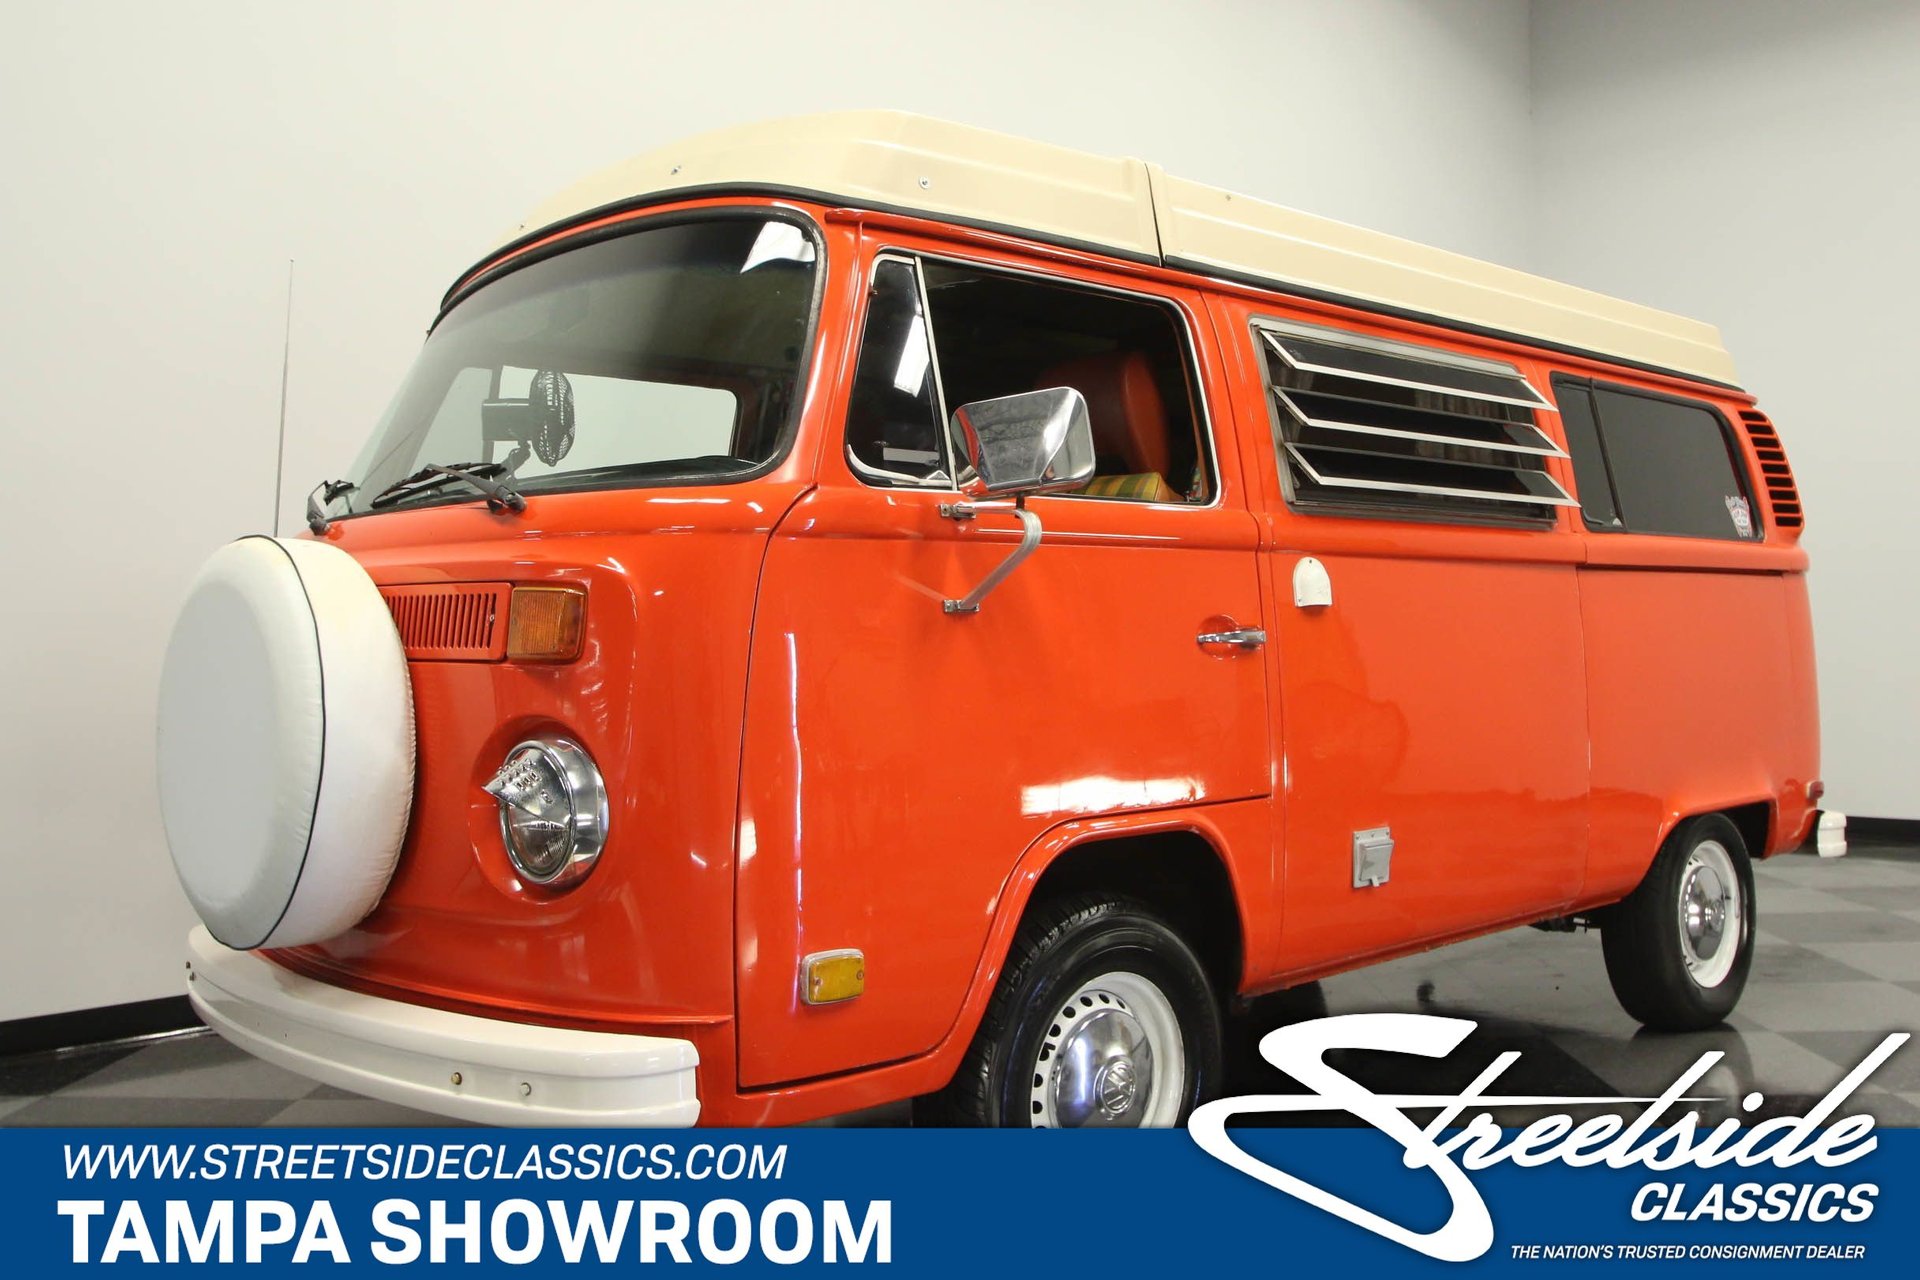 1974 Volkswagen Type 2 | Classic Cars for Sale - Streetside Classics